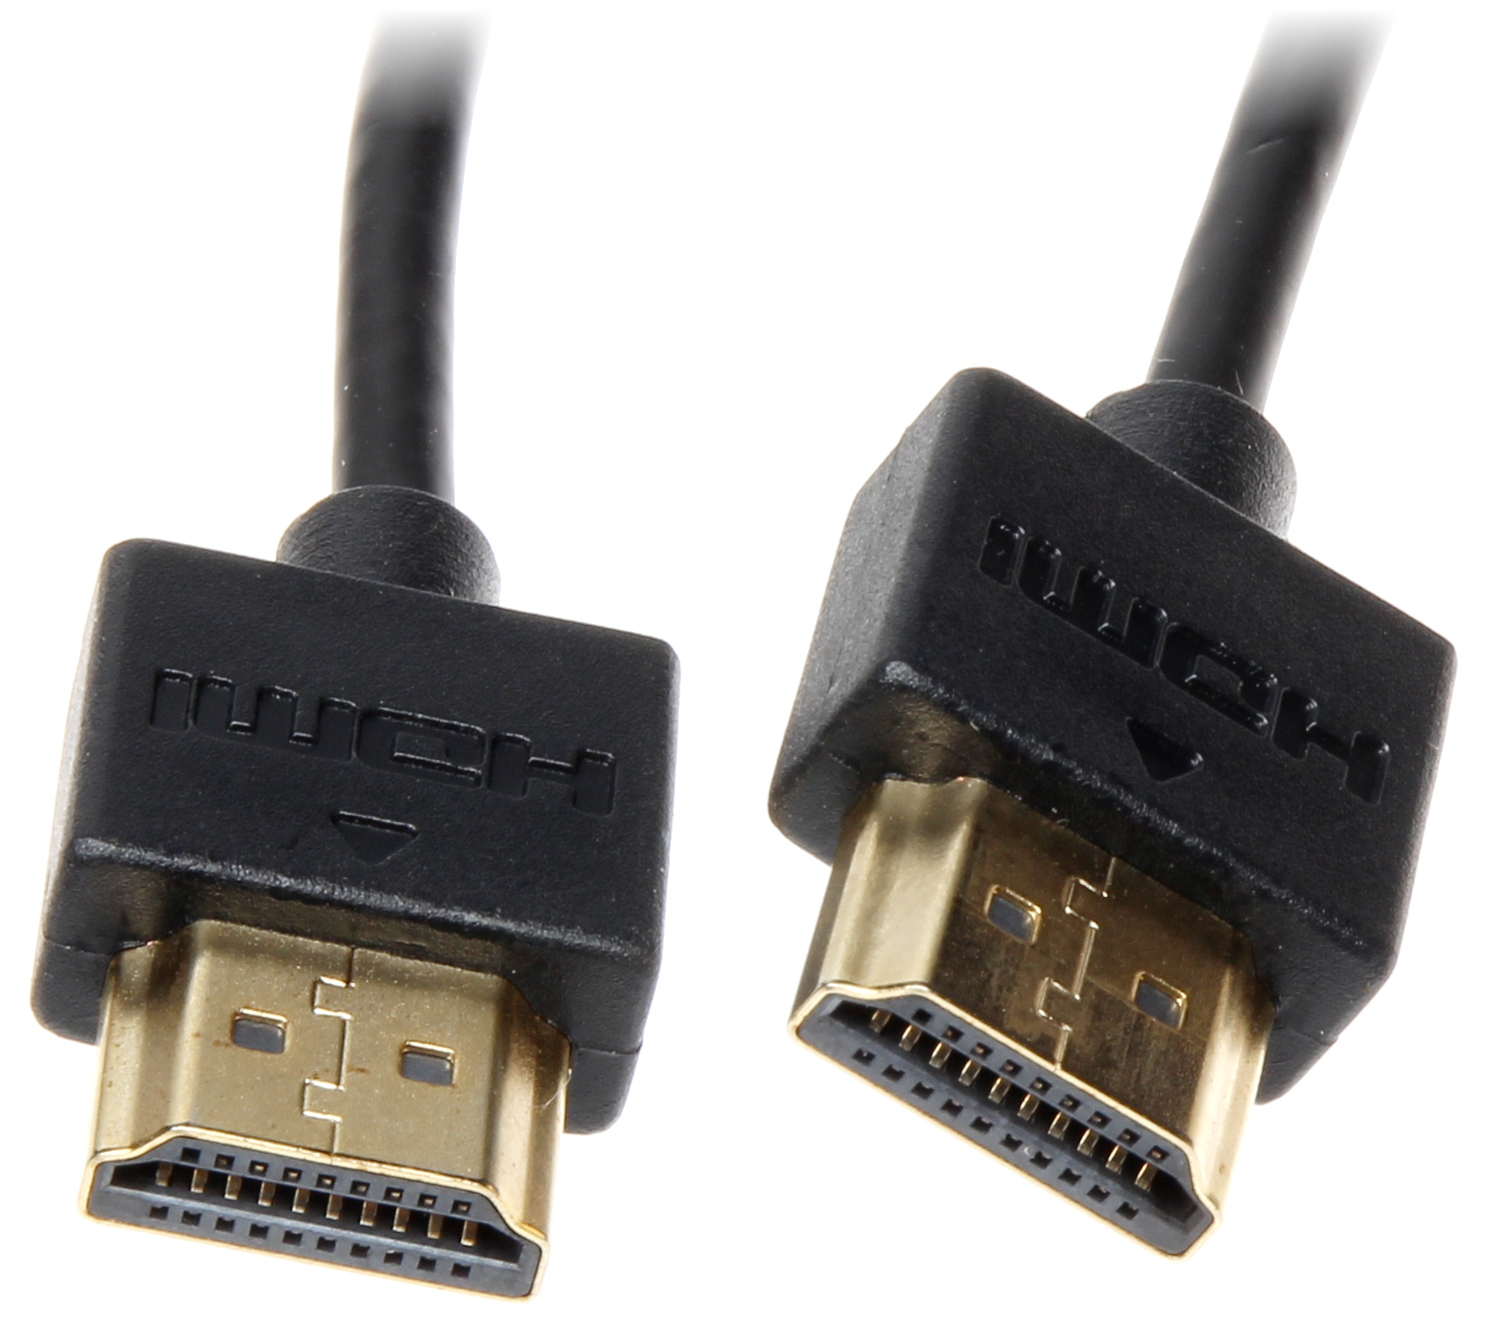 CABLE HDMI-1.0 1 m - HDMI Cables up to 1 m Length - Delta